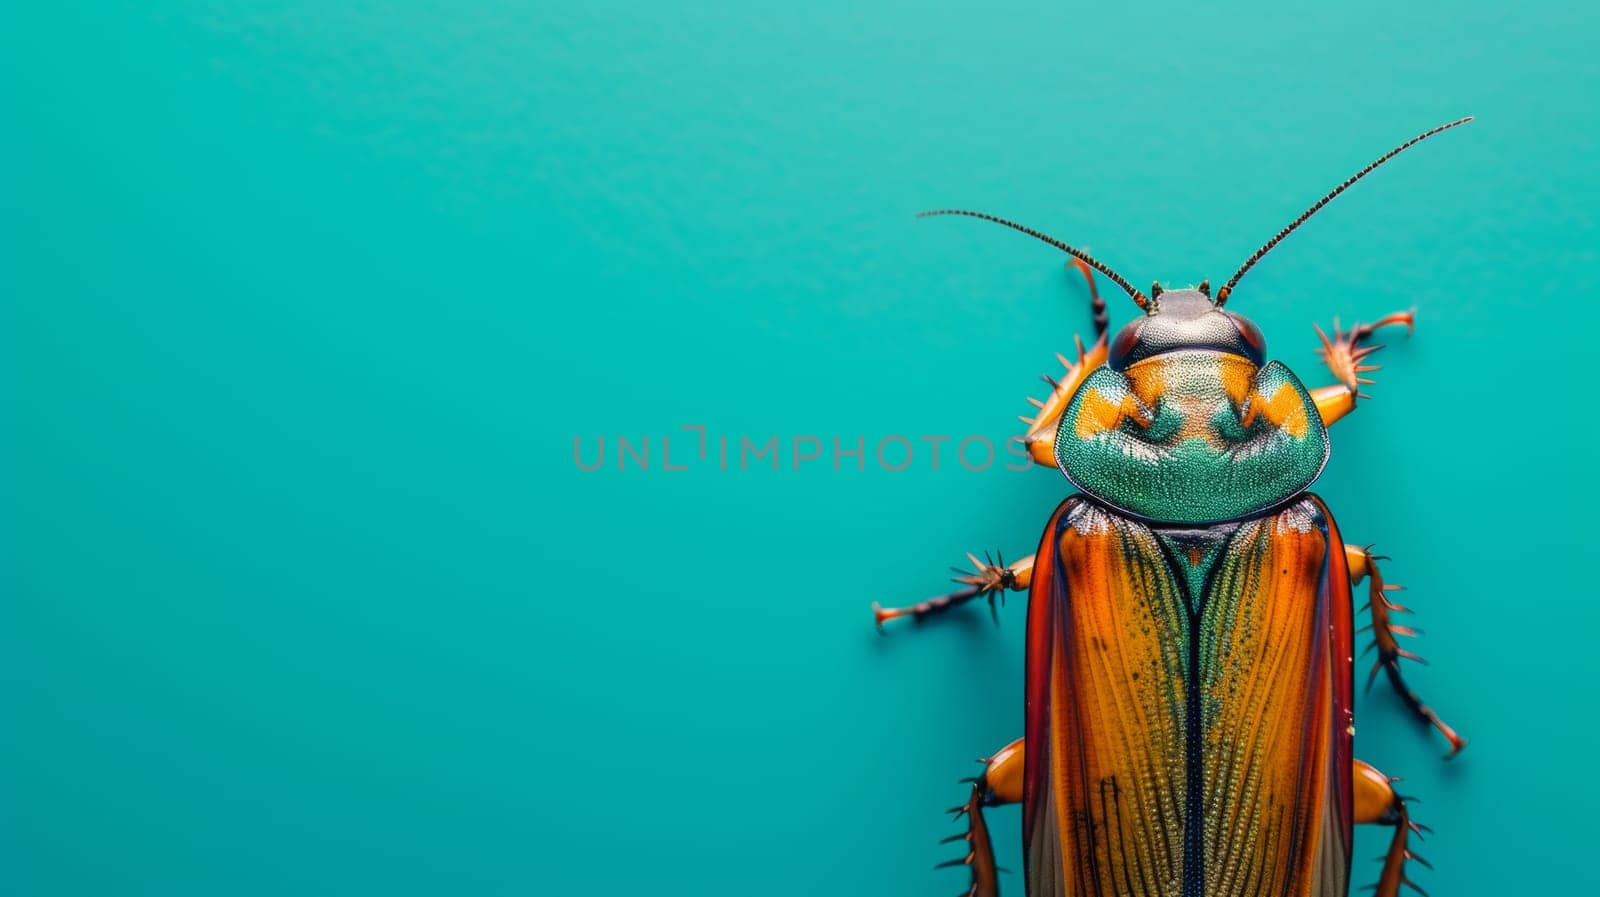 A close up of a bug on the blue background